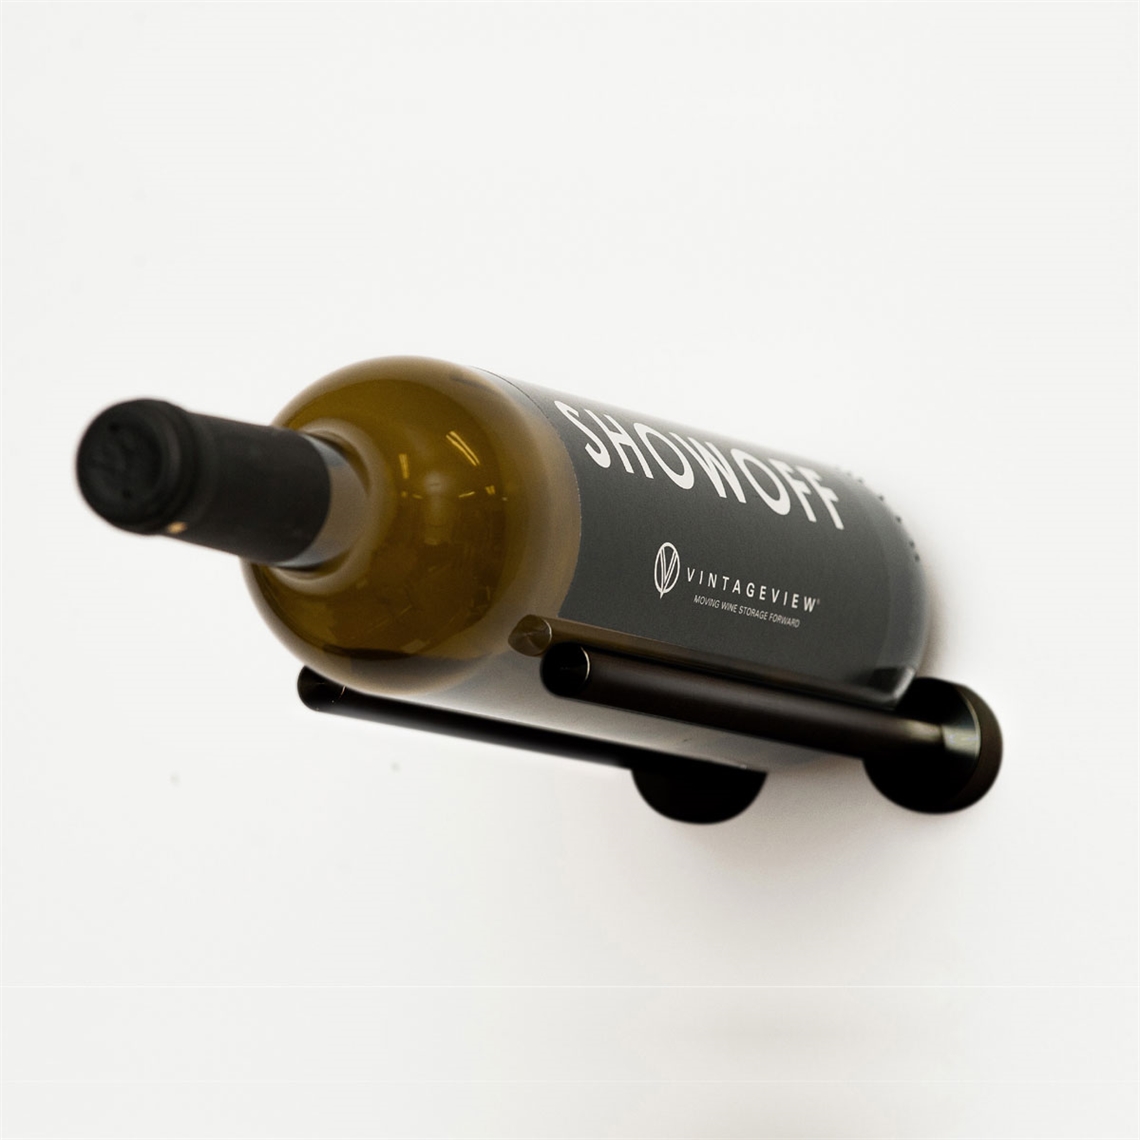 View more wine racks for restaurants, bars and shops from our Wall Mounted Wine Racks range